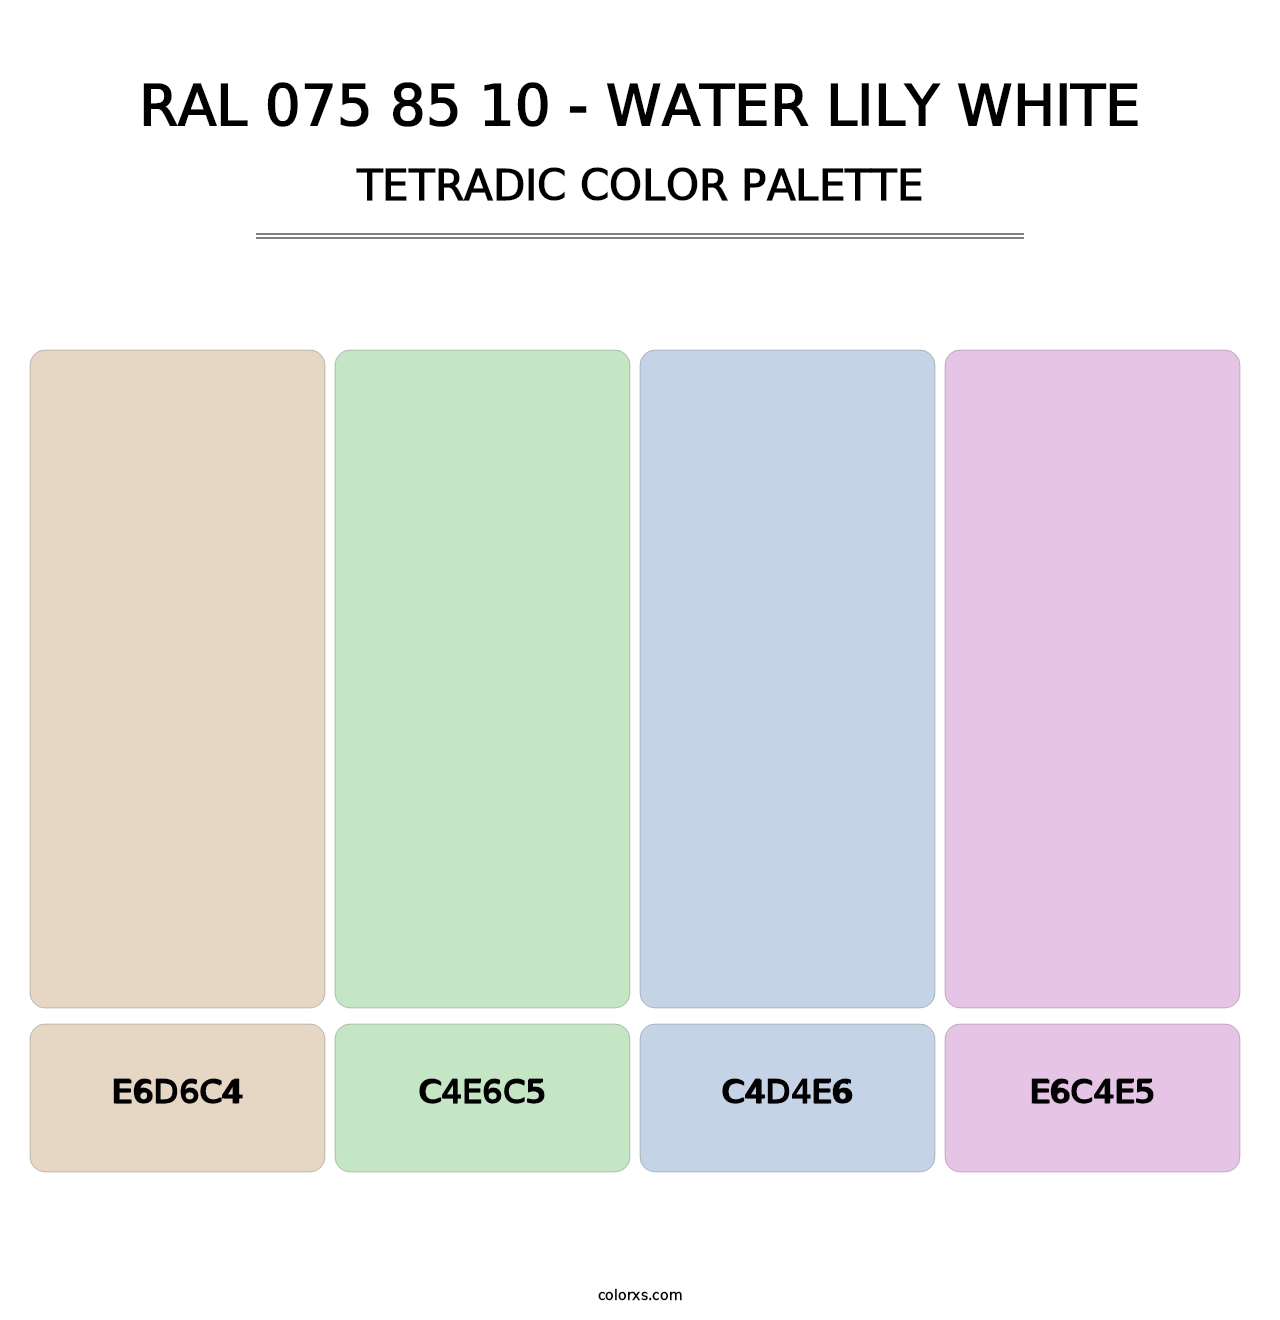 RAL 075 85 10 - Water Lily White - Tetradic Color Palette